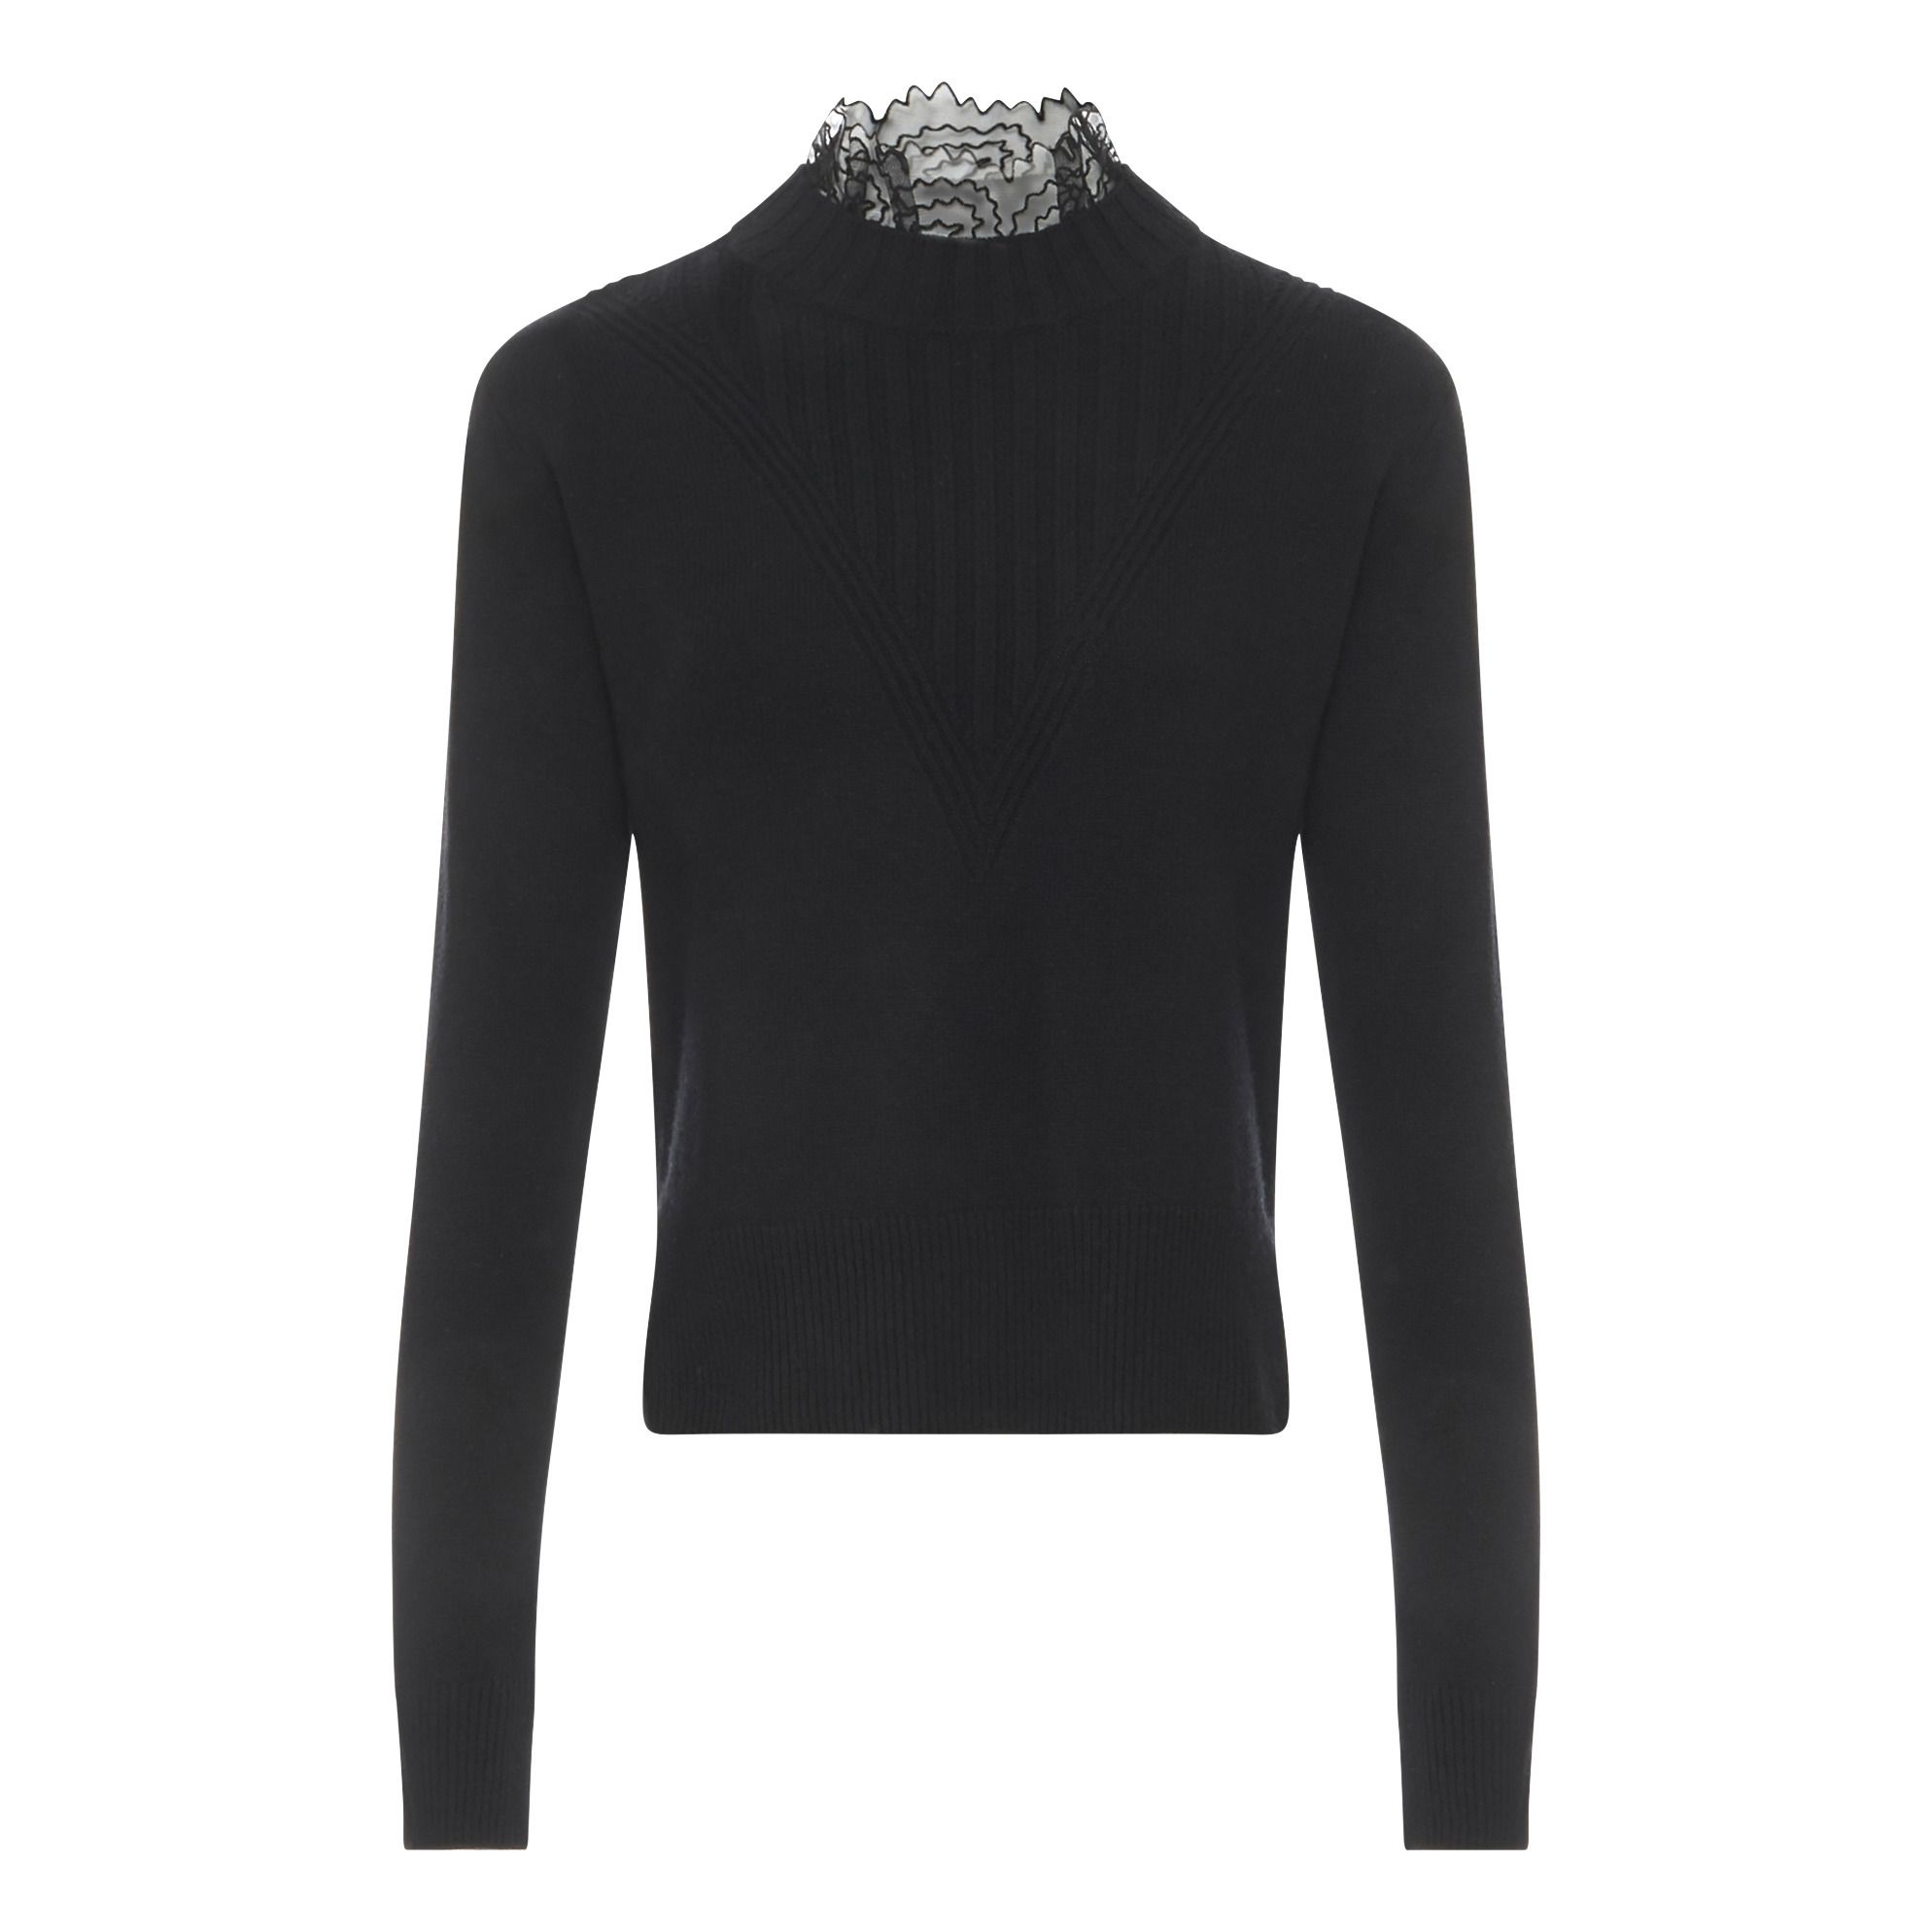 black jumper with white collar